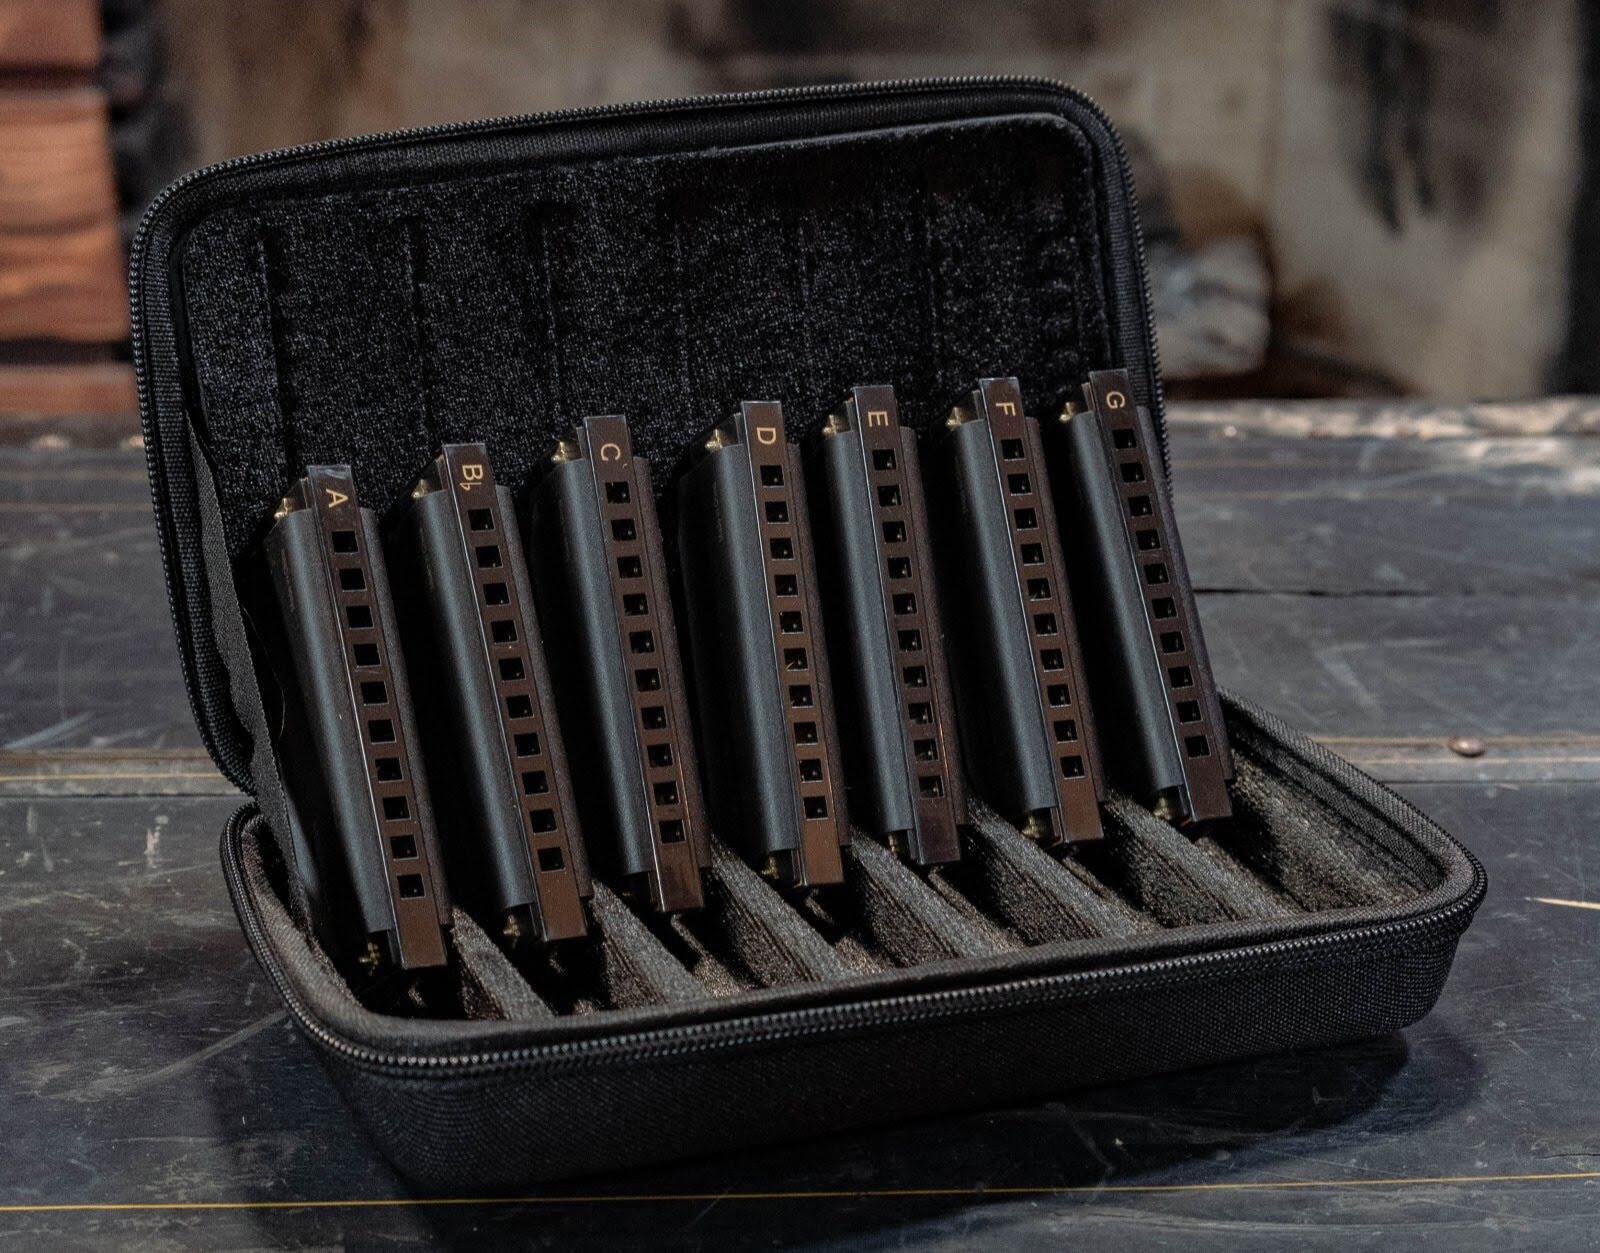 Harmonica Set Review: The Perfect Gift for Him